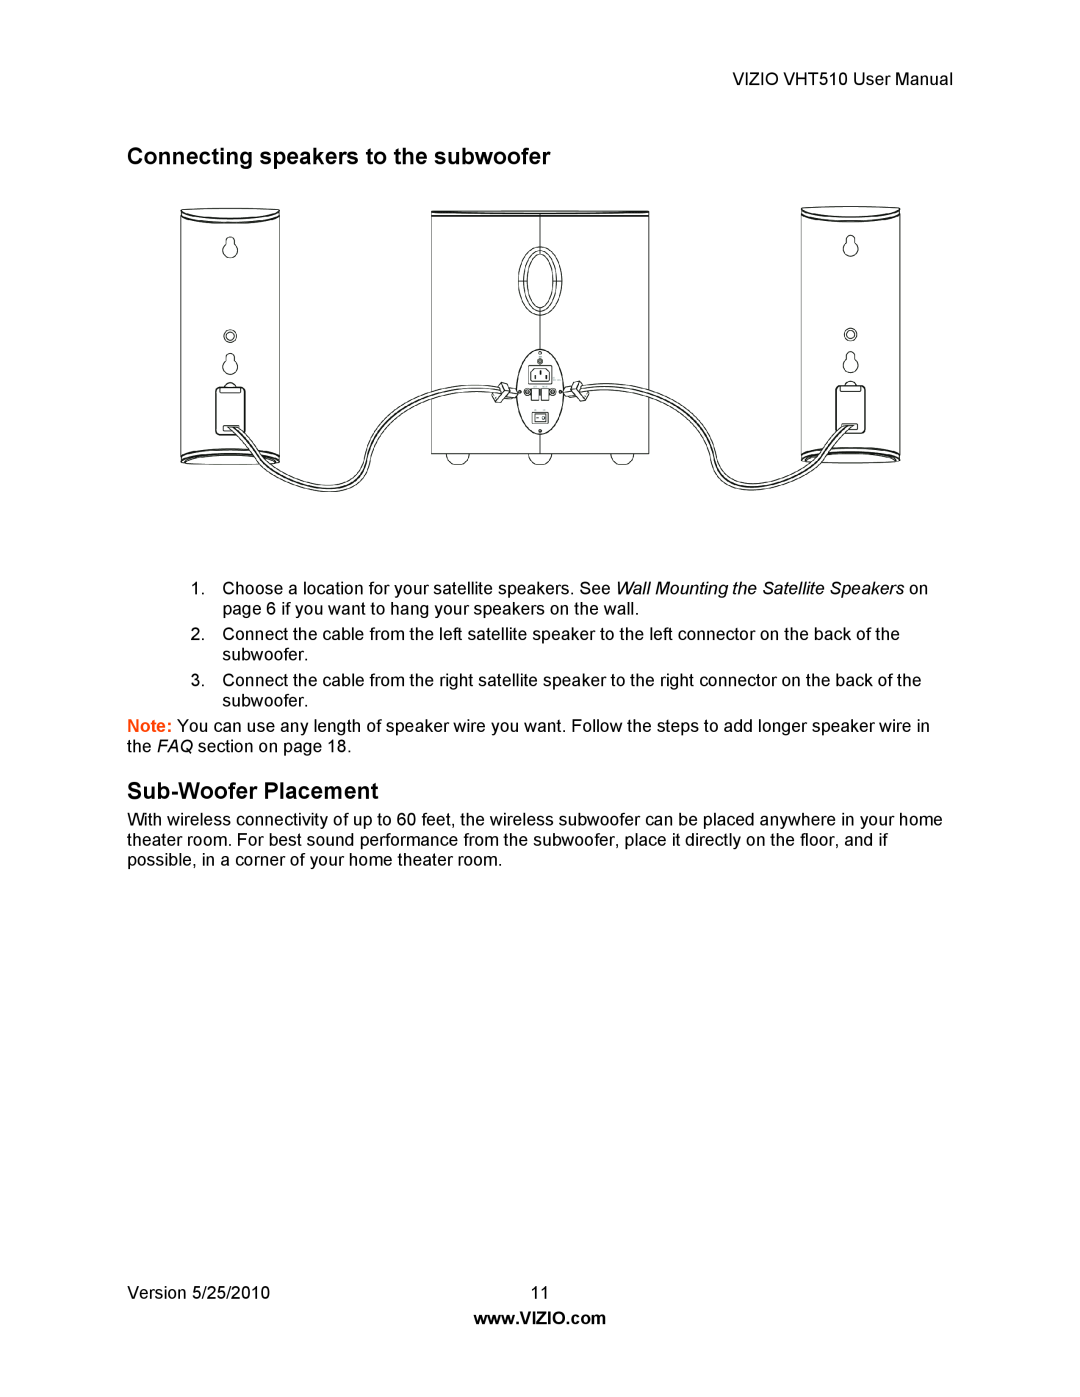 Vizio VHT510 user manual Connecting speakers to the subwoofer, Sub-WooferPlacement 